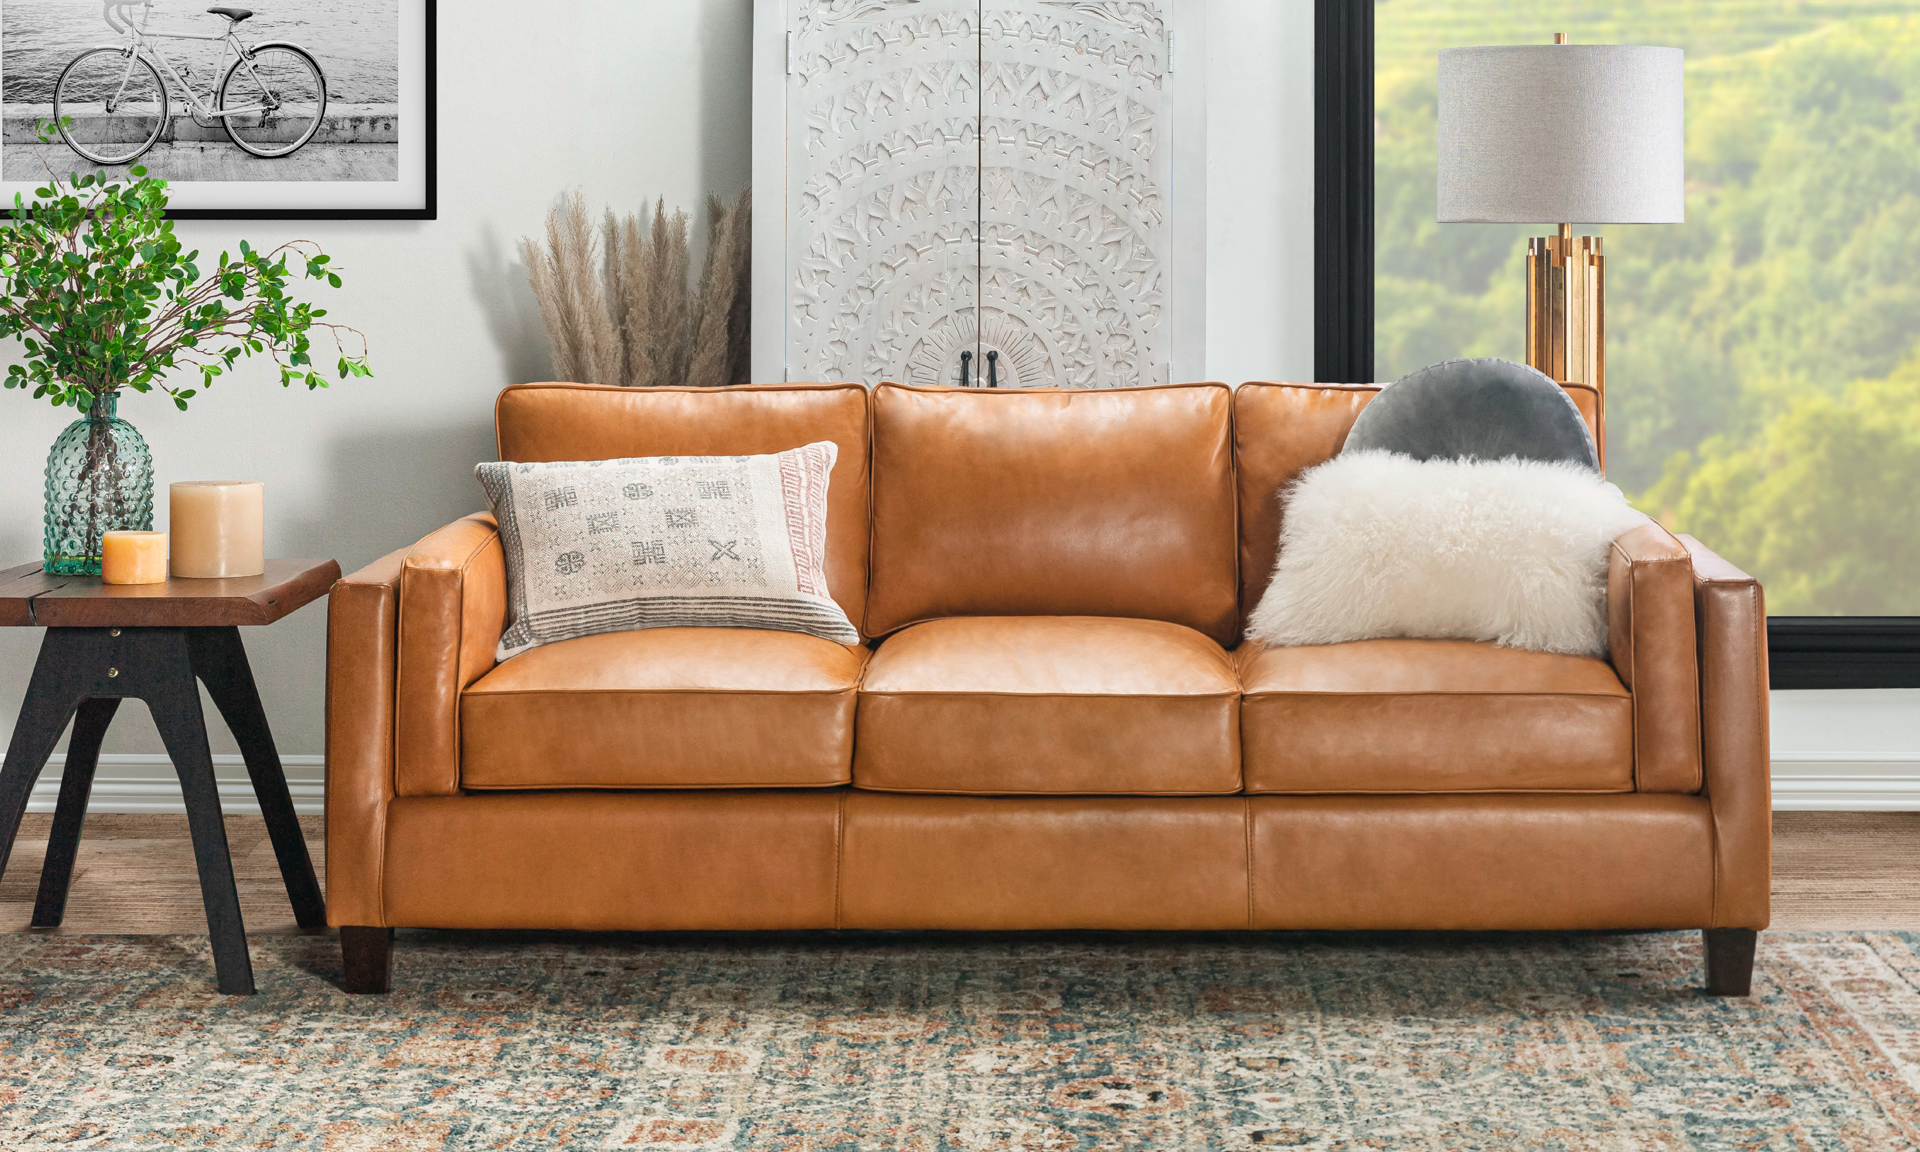 Tan Couch Topper With Orange Tassels | Throwpillow